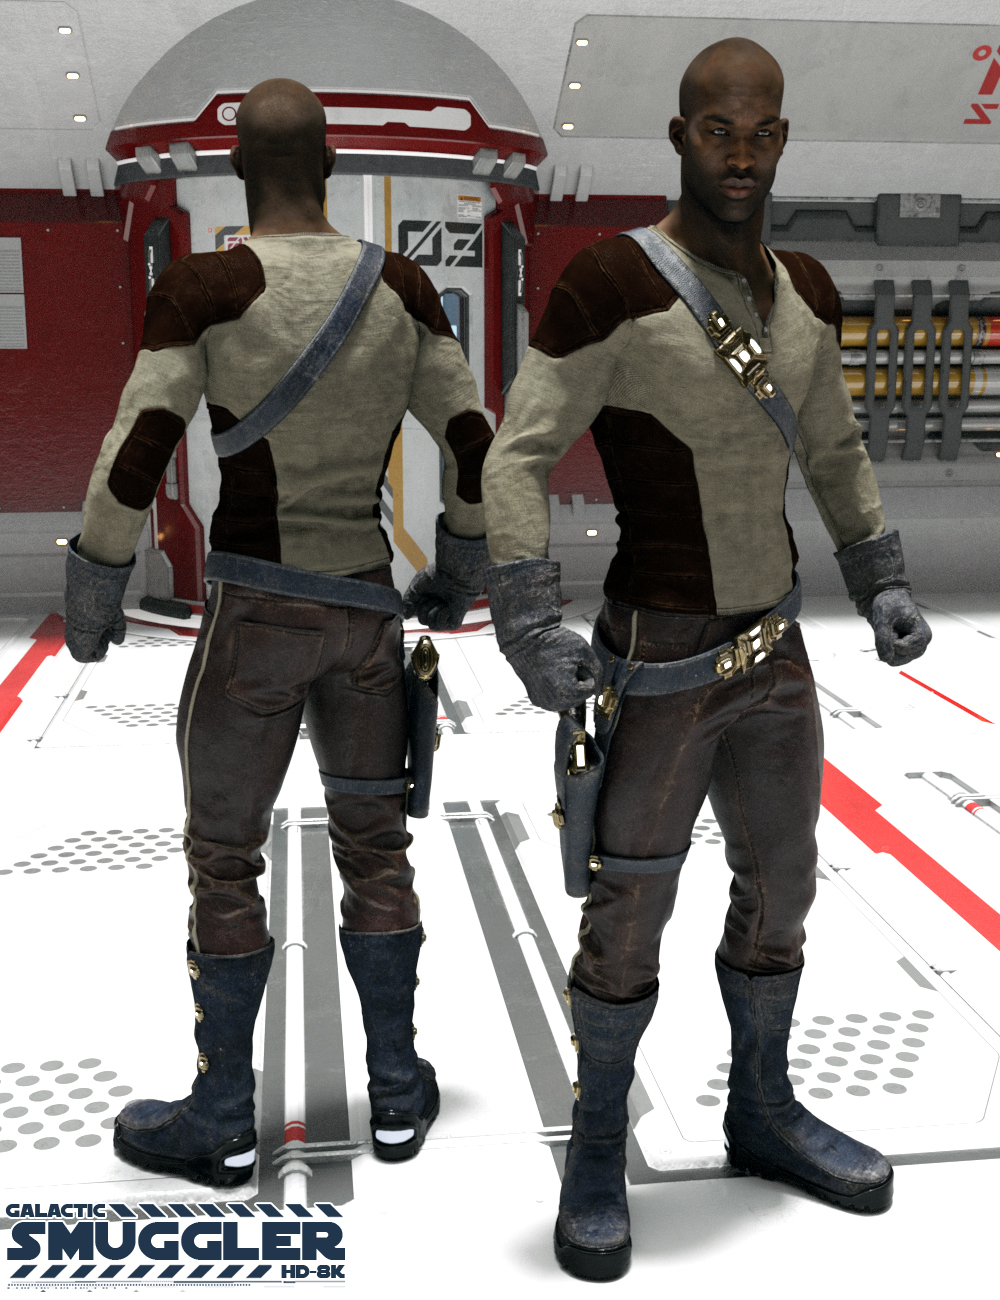 Galactic Smuggler HD-8K for Genesis 2 Male(s) by: Luthbel, 3D Models by Daz 3D